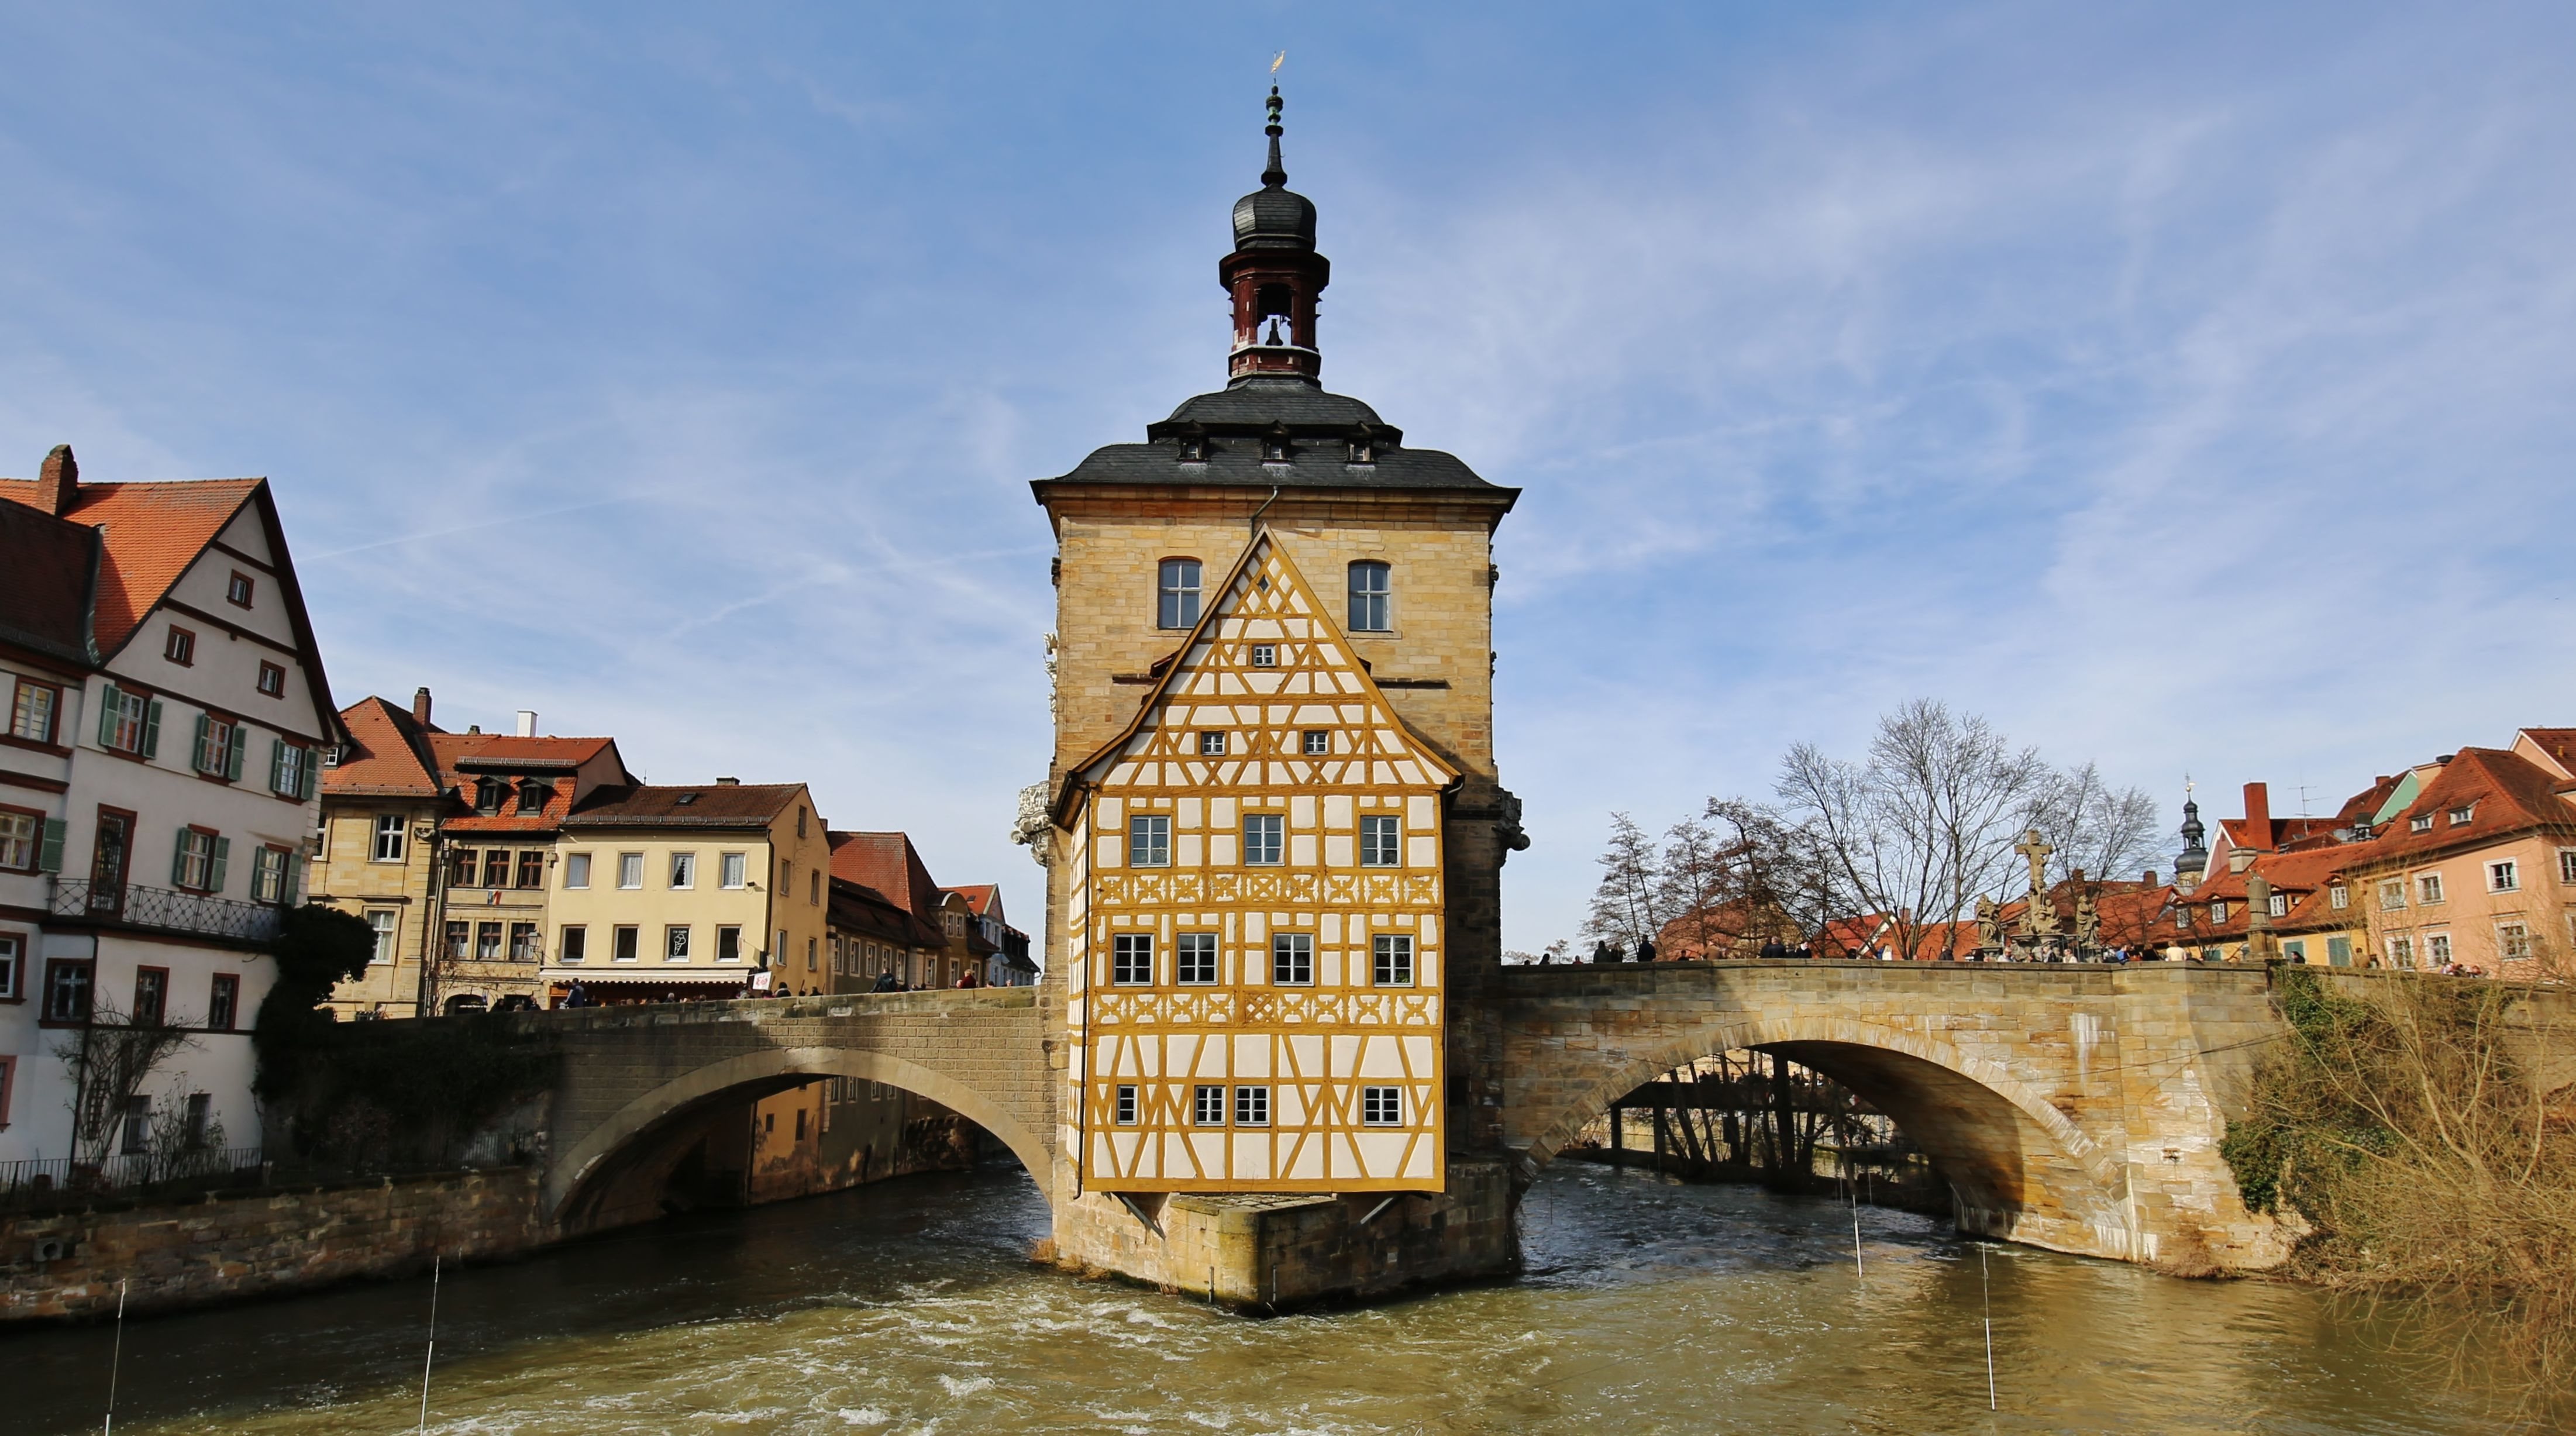 Download wallpaper bamberg, bayern, old town hall, germany for desktop with resolution 4404x2455. High Quality HD picture wallpaper